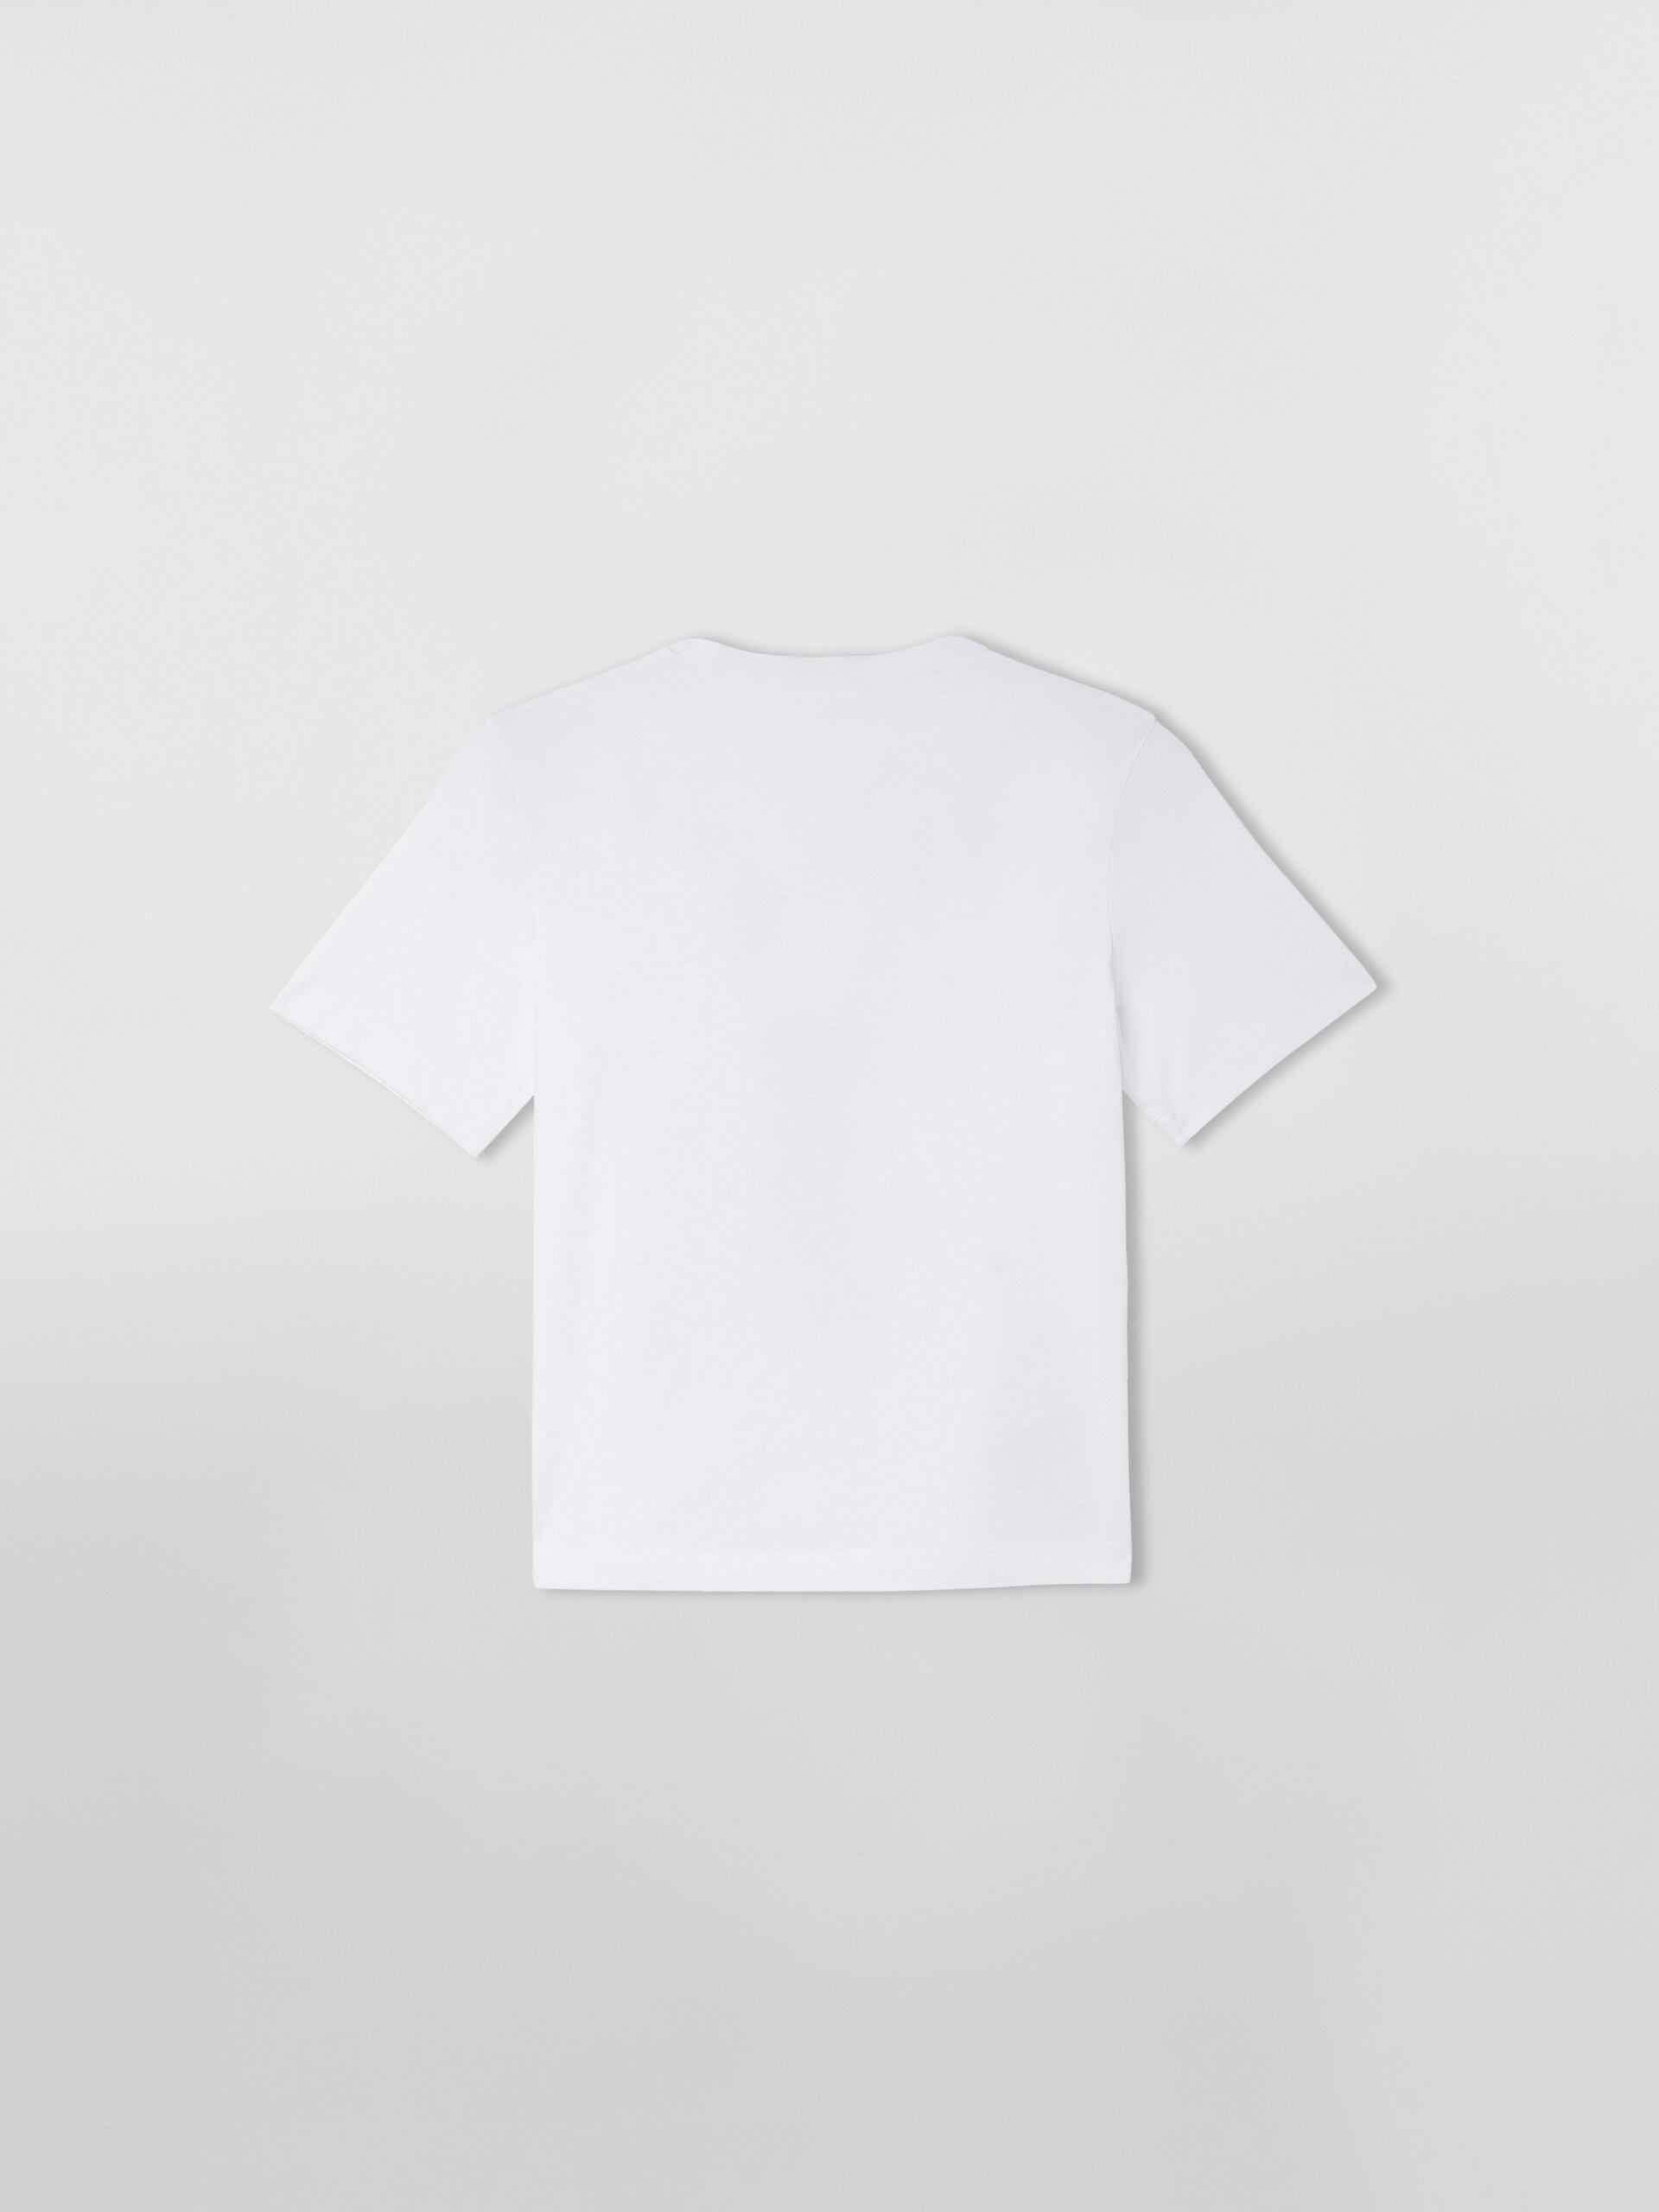 T-SHIRT WITH PRINT - T-shirts - Image 2